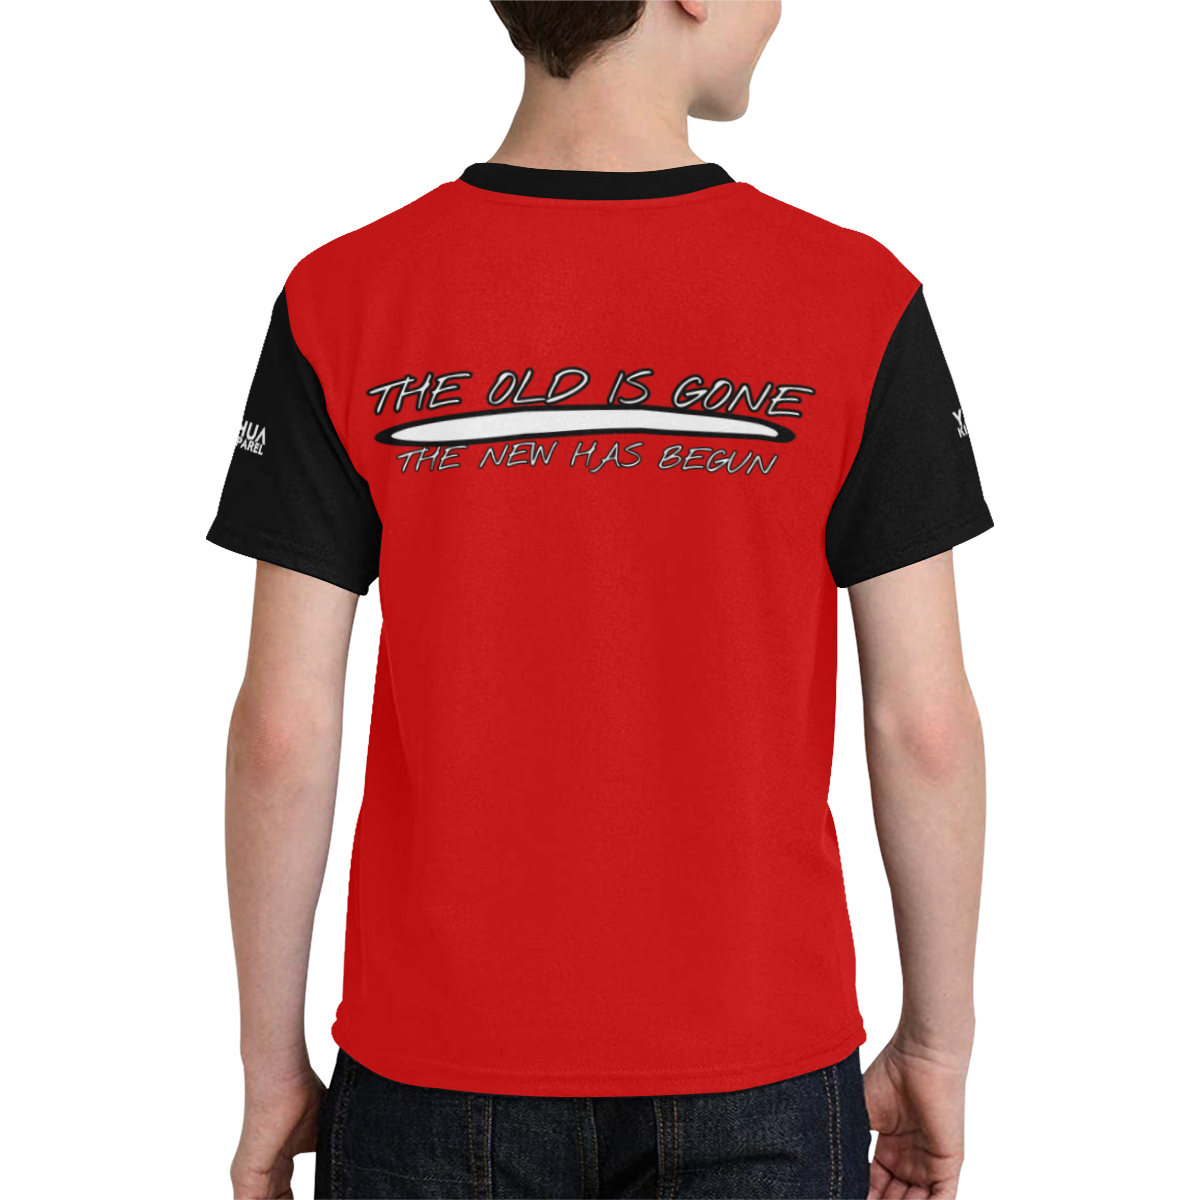 YahBoy Inc Red Kids' All Over Print T-shirt (Model T65)